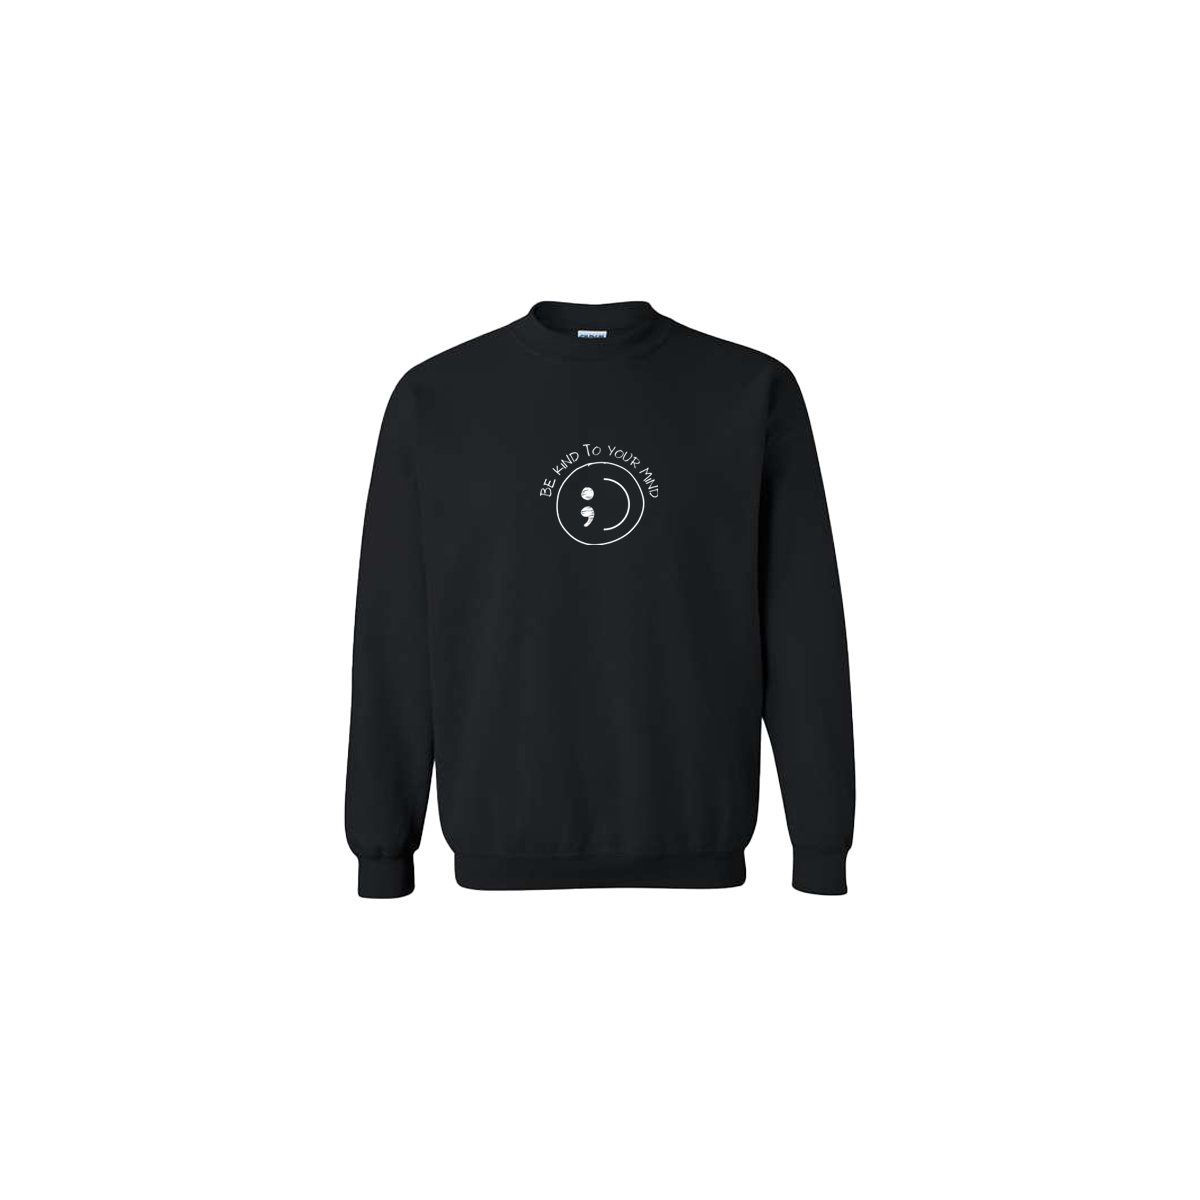 Be Kind To Your Mind Smiley Face Embroidered Black Crewneck - Mental Health Awareness Clothing